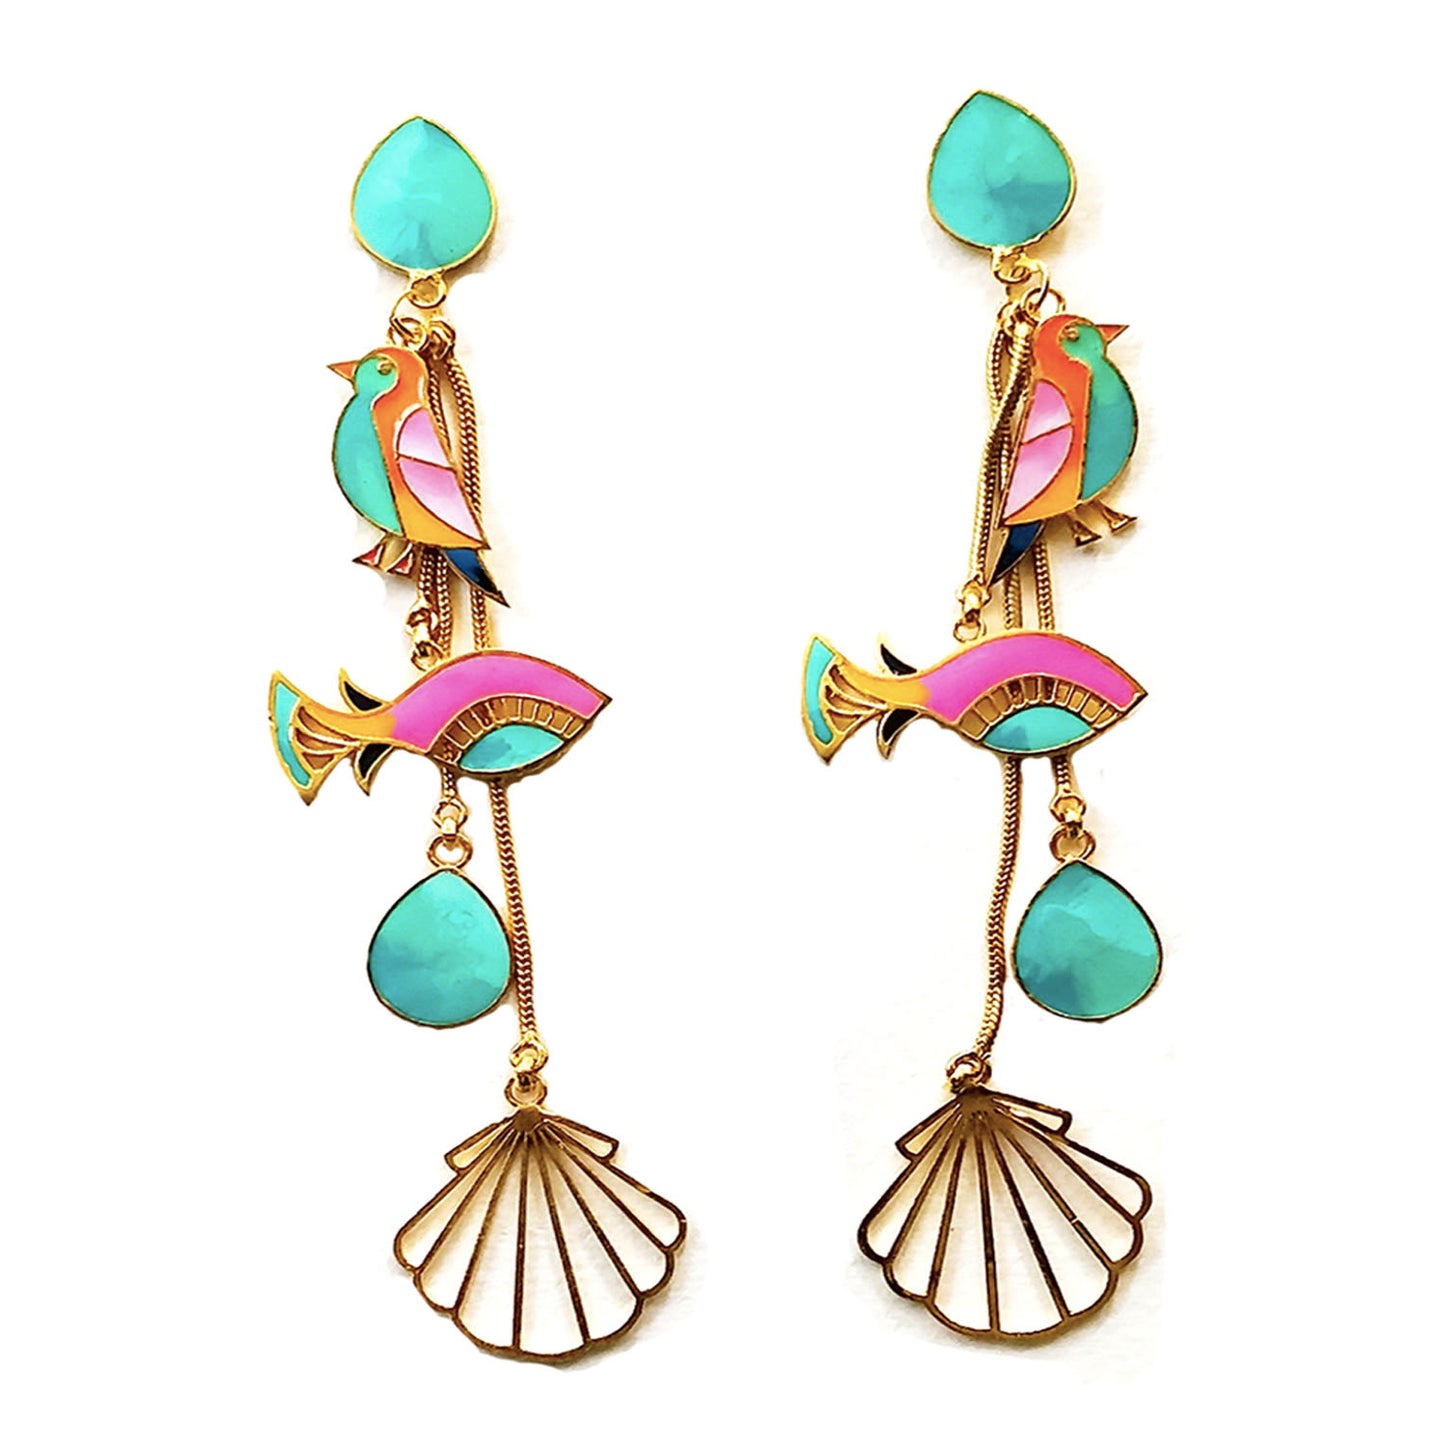 Bird and the fish earrings